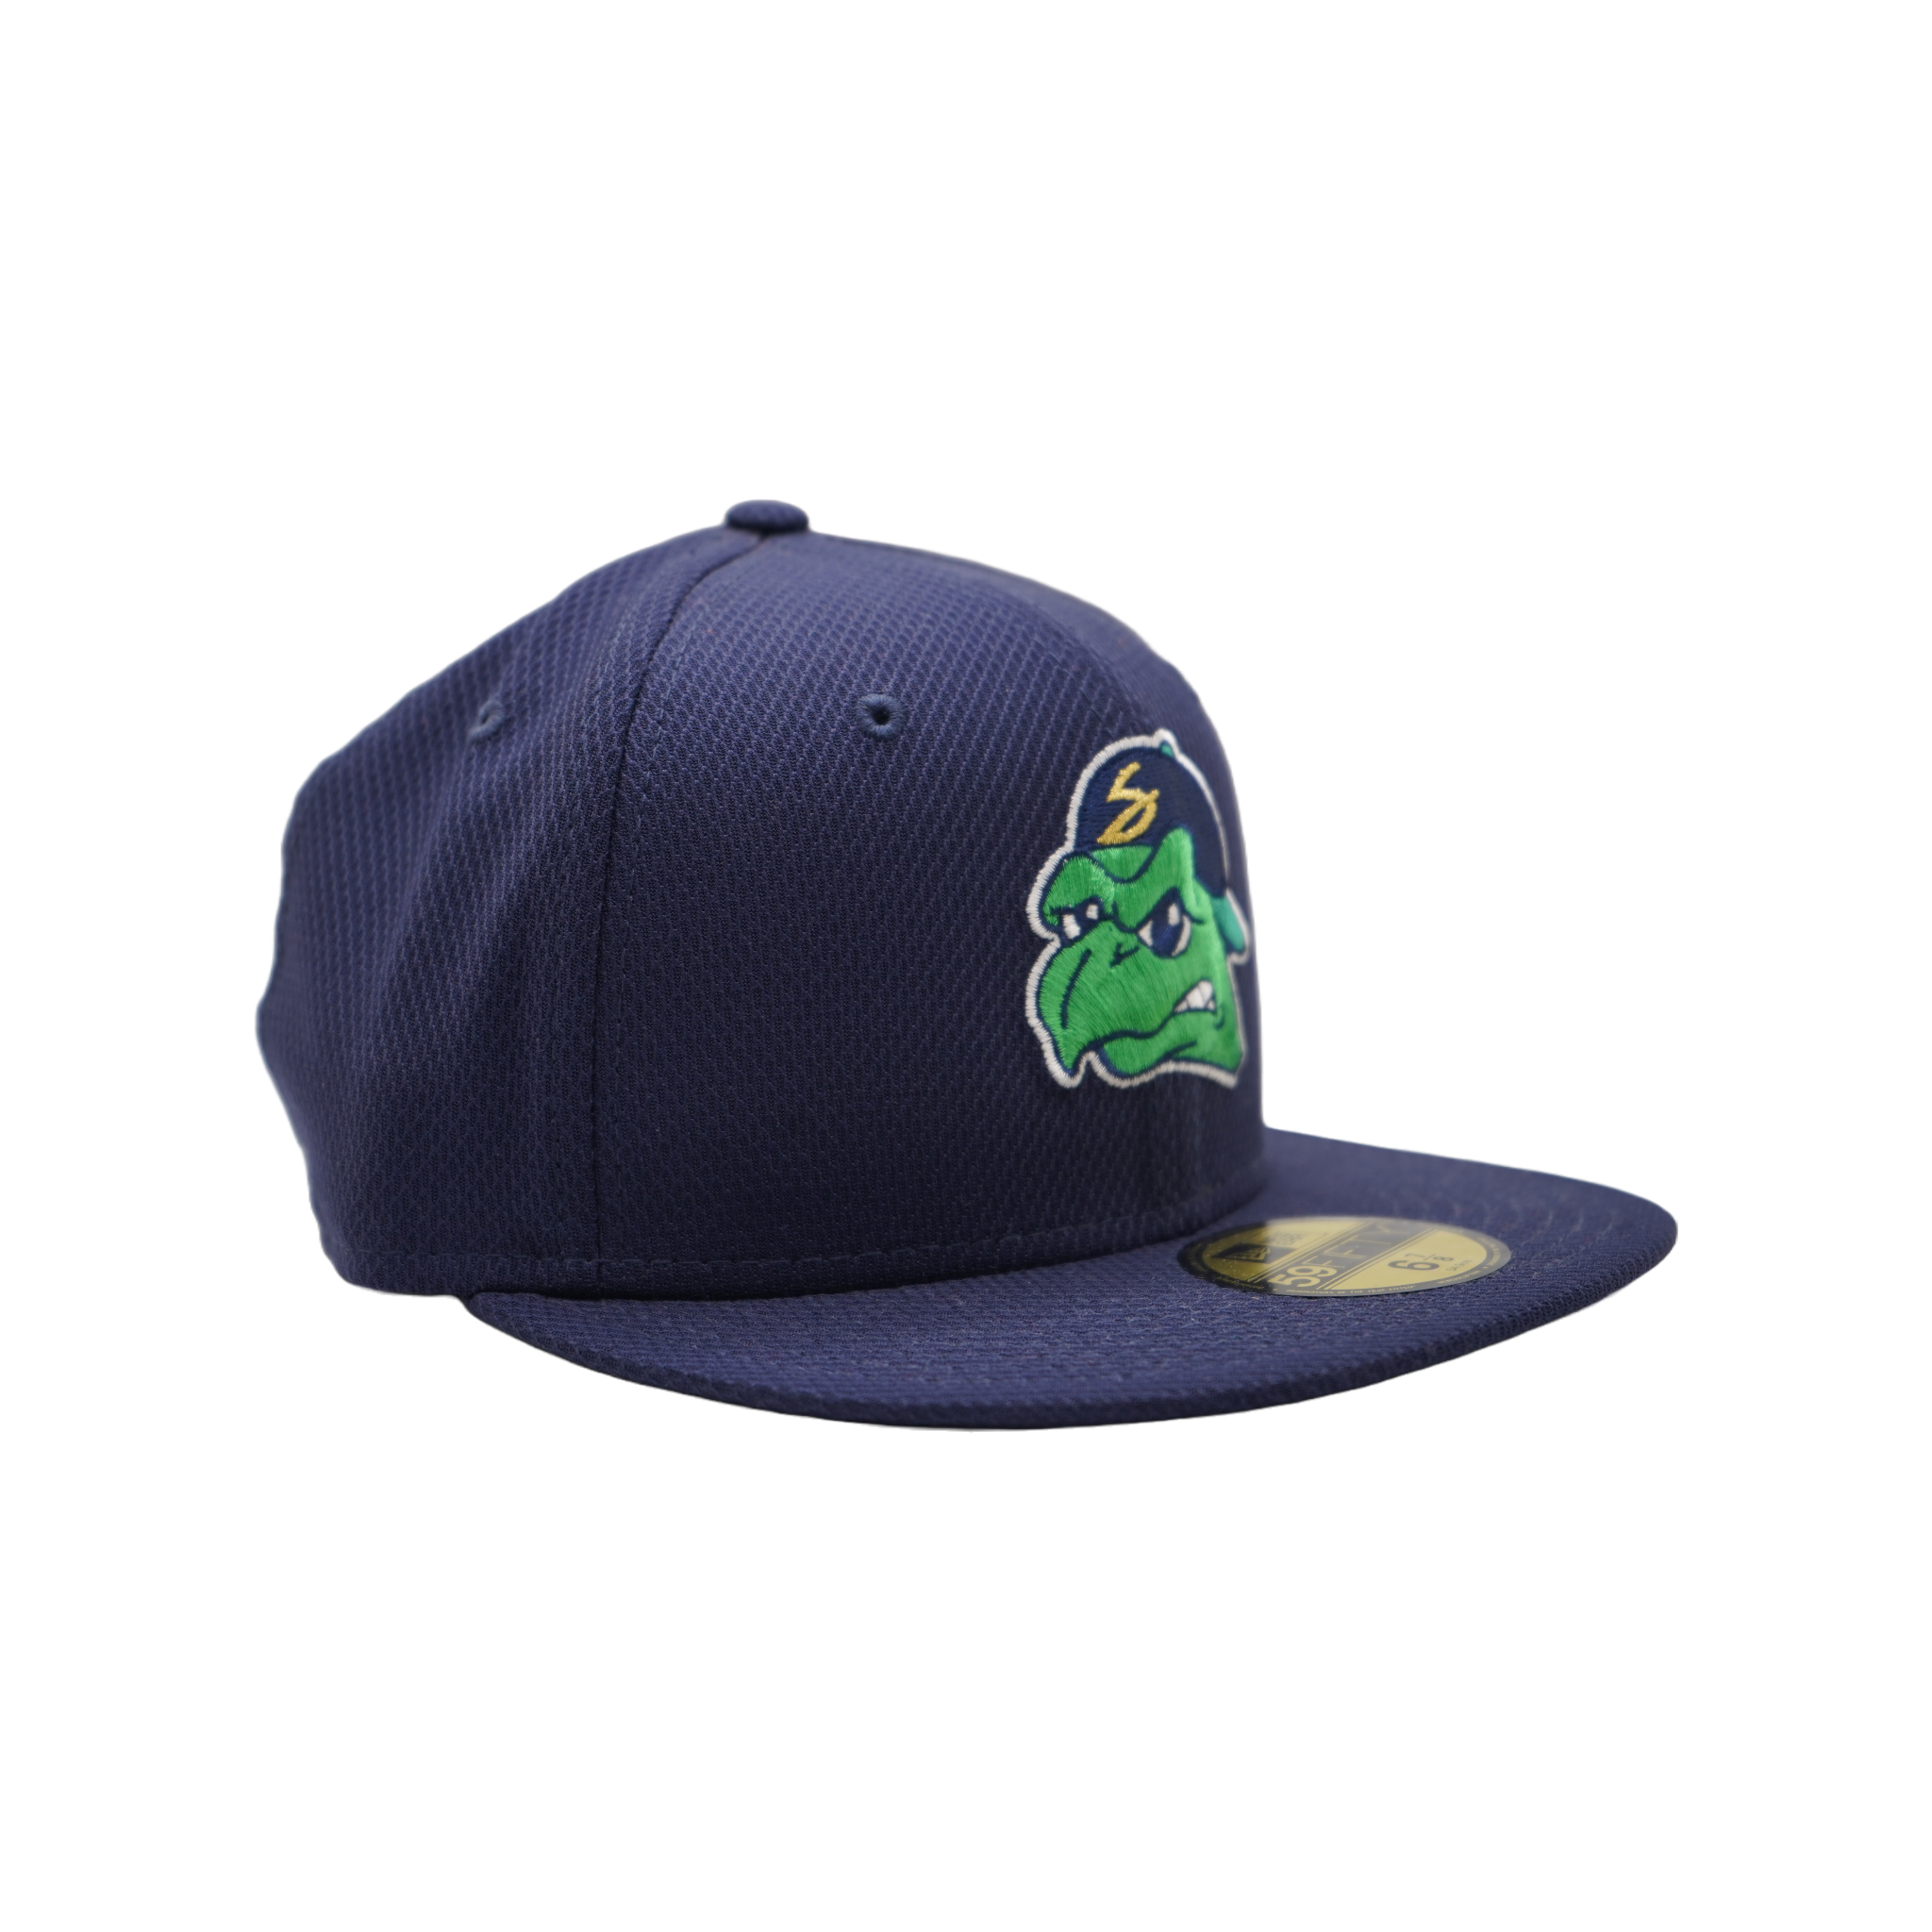 Official Beloit Snappers Fitted Hats, Snappers Fitted Caps